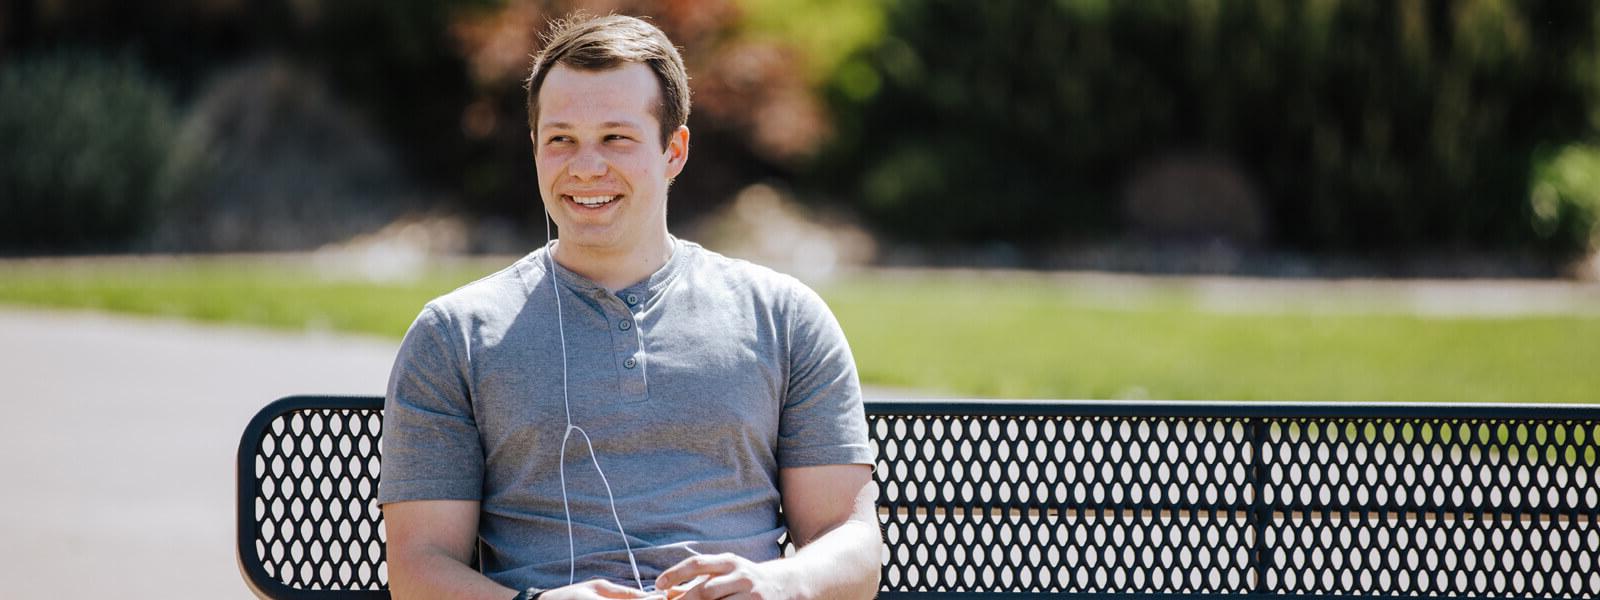 Male student sitting on bench with headphones smiling